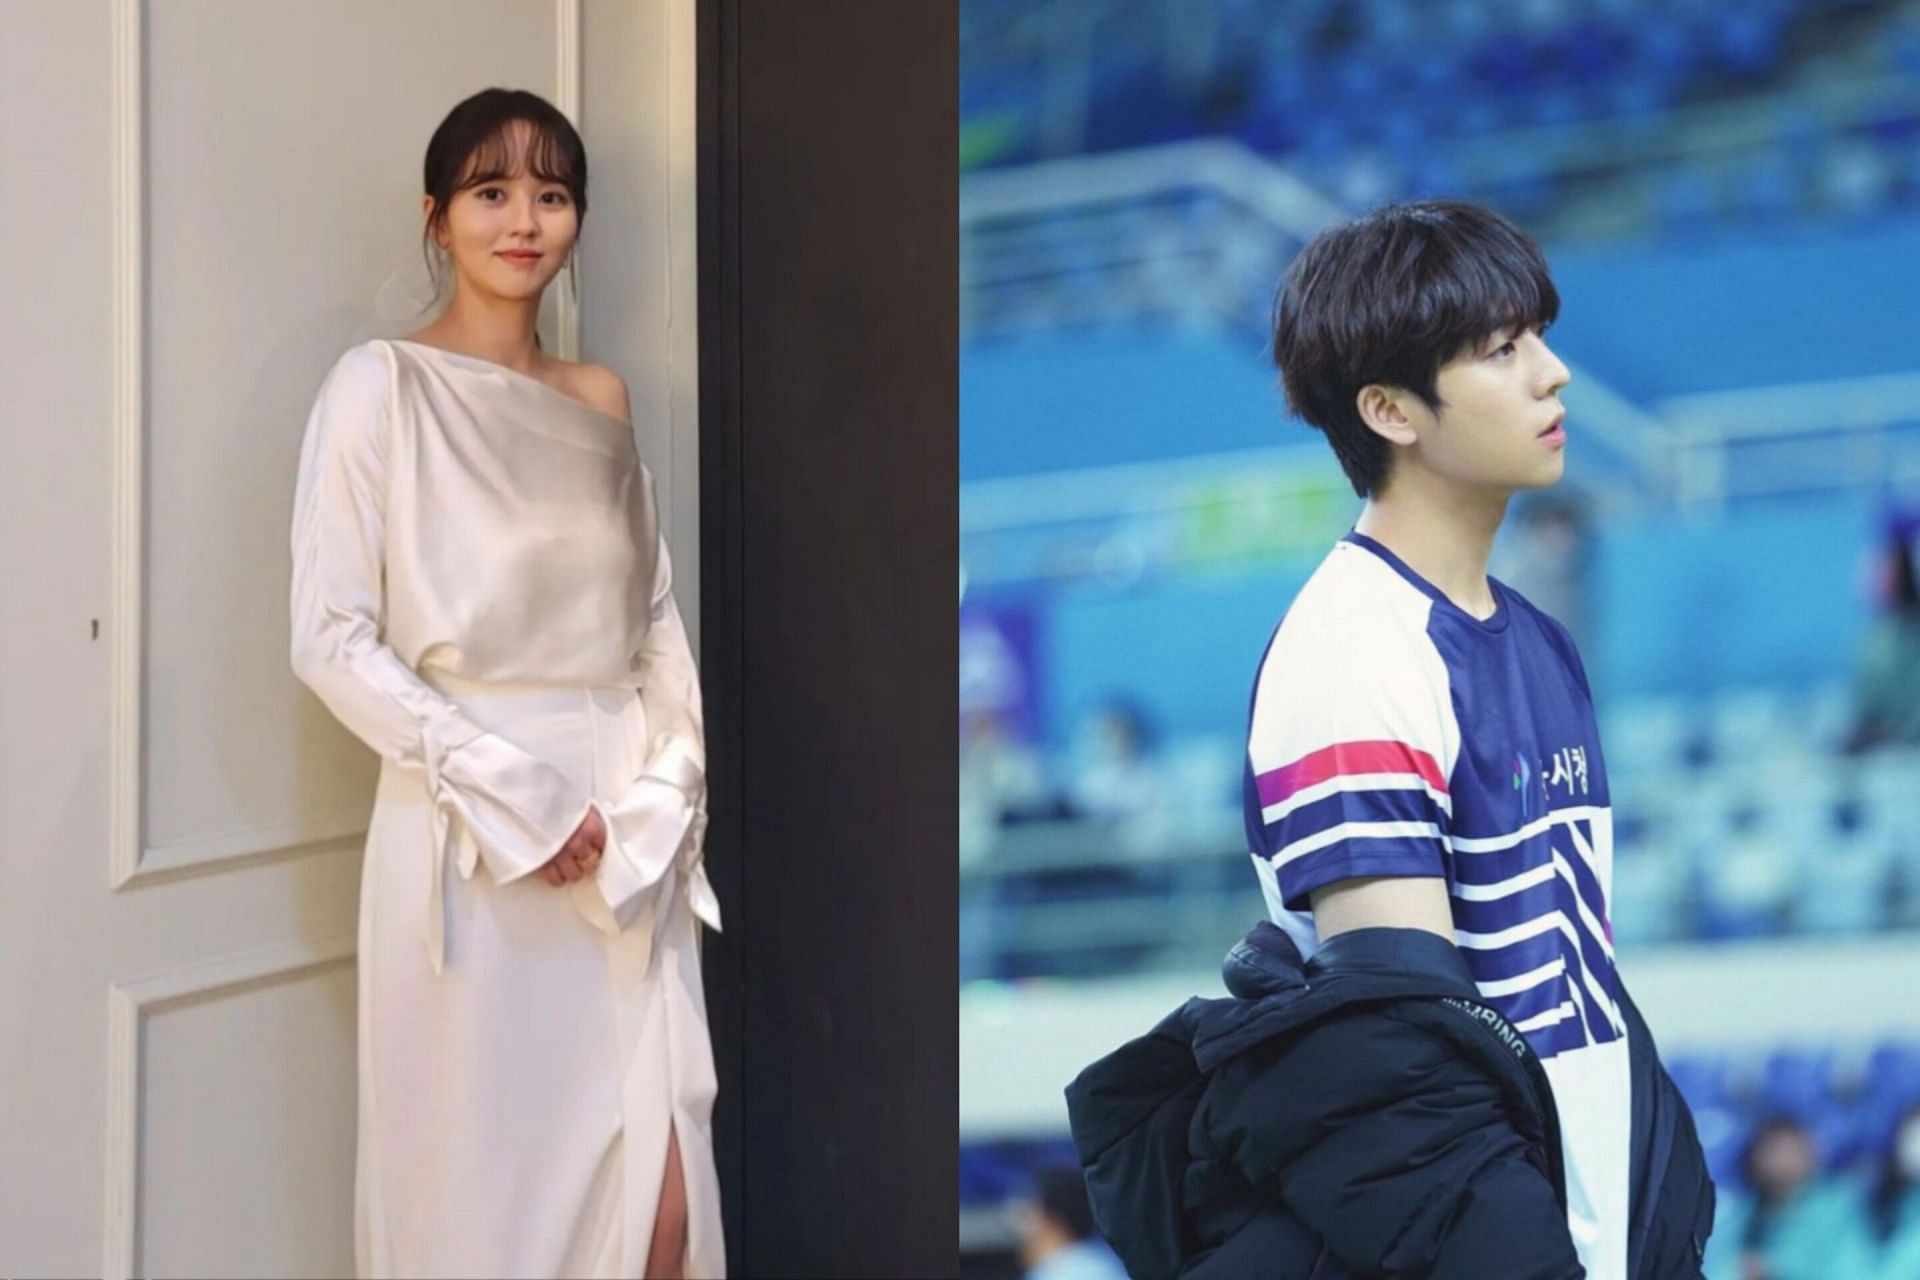 Serendipity&rsquo;s Embrace starring Kim So-hyun and Chae Jong-hyeop: Release date, air time, plot, cast, &amp; all you need to know (Image via chaejh, wow_kimsohyun/Instagram)